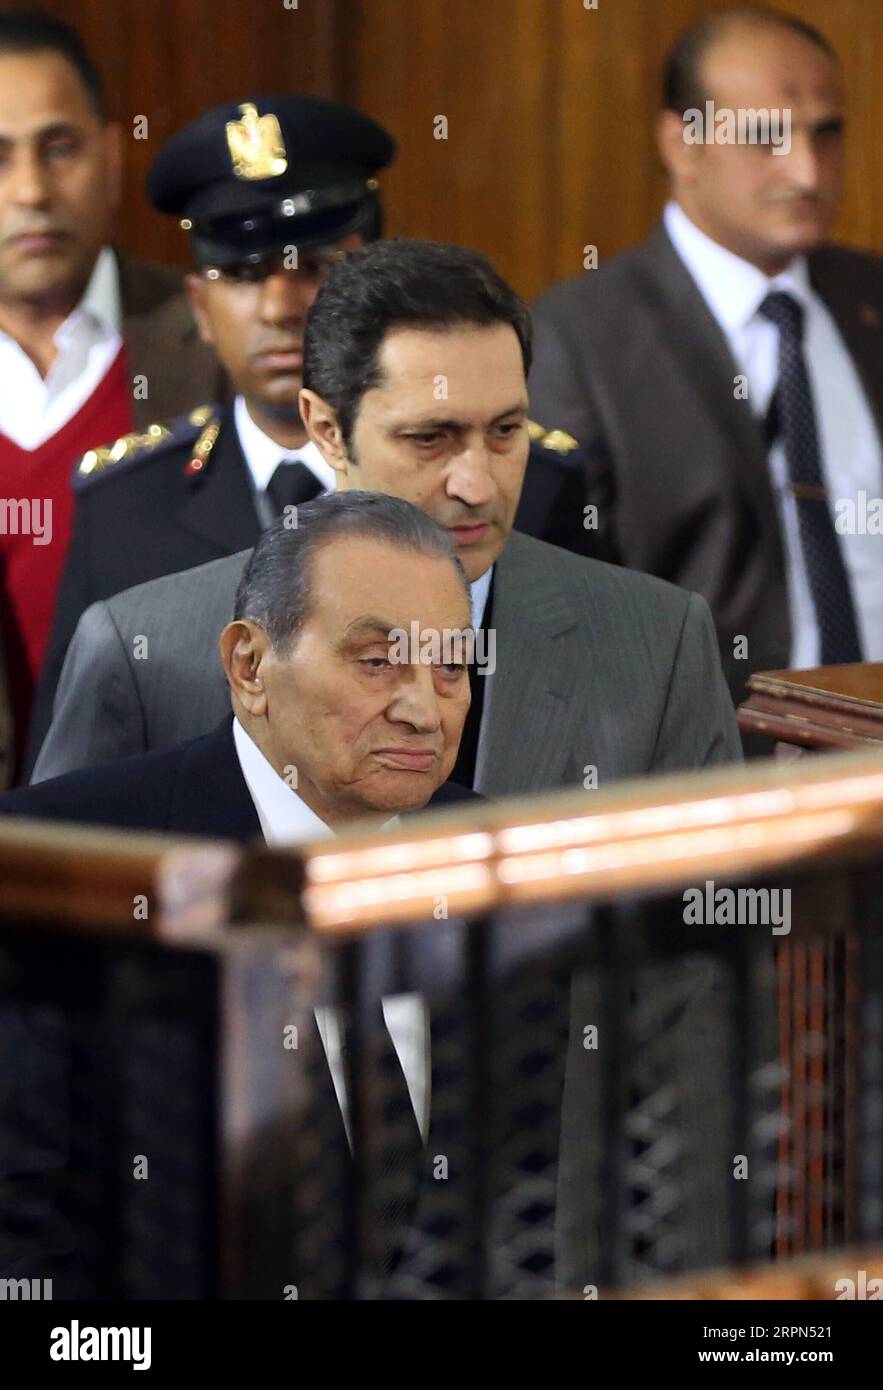 200222 -- CAIRO, Feb. 22, 2020 -- File photo taken on Dec. 26, 2018 shows Alaa Mubarak 2nd R and his father, ousted Egyptian president Mohamed Hosni Mubarak front, in a court in Cairo, Egypt. An Egyptian court acquitted on Saturday Alaa and Gamal Mubarak, the sons of ousted Egyptian president Mohamed Hosni Mubarak, in a corruption case, state-run Ahram Online news website reported.  EGYPT-CAIRO-SONS OF EX-PRESIDENT MUBARAK-CORRUPTION CHARGES AhmedxGomaa PUBLICATIONxNOTxINxCHN Stock Photo